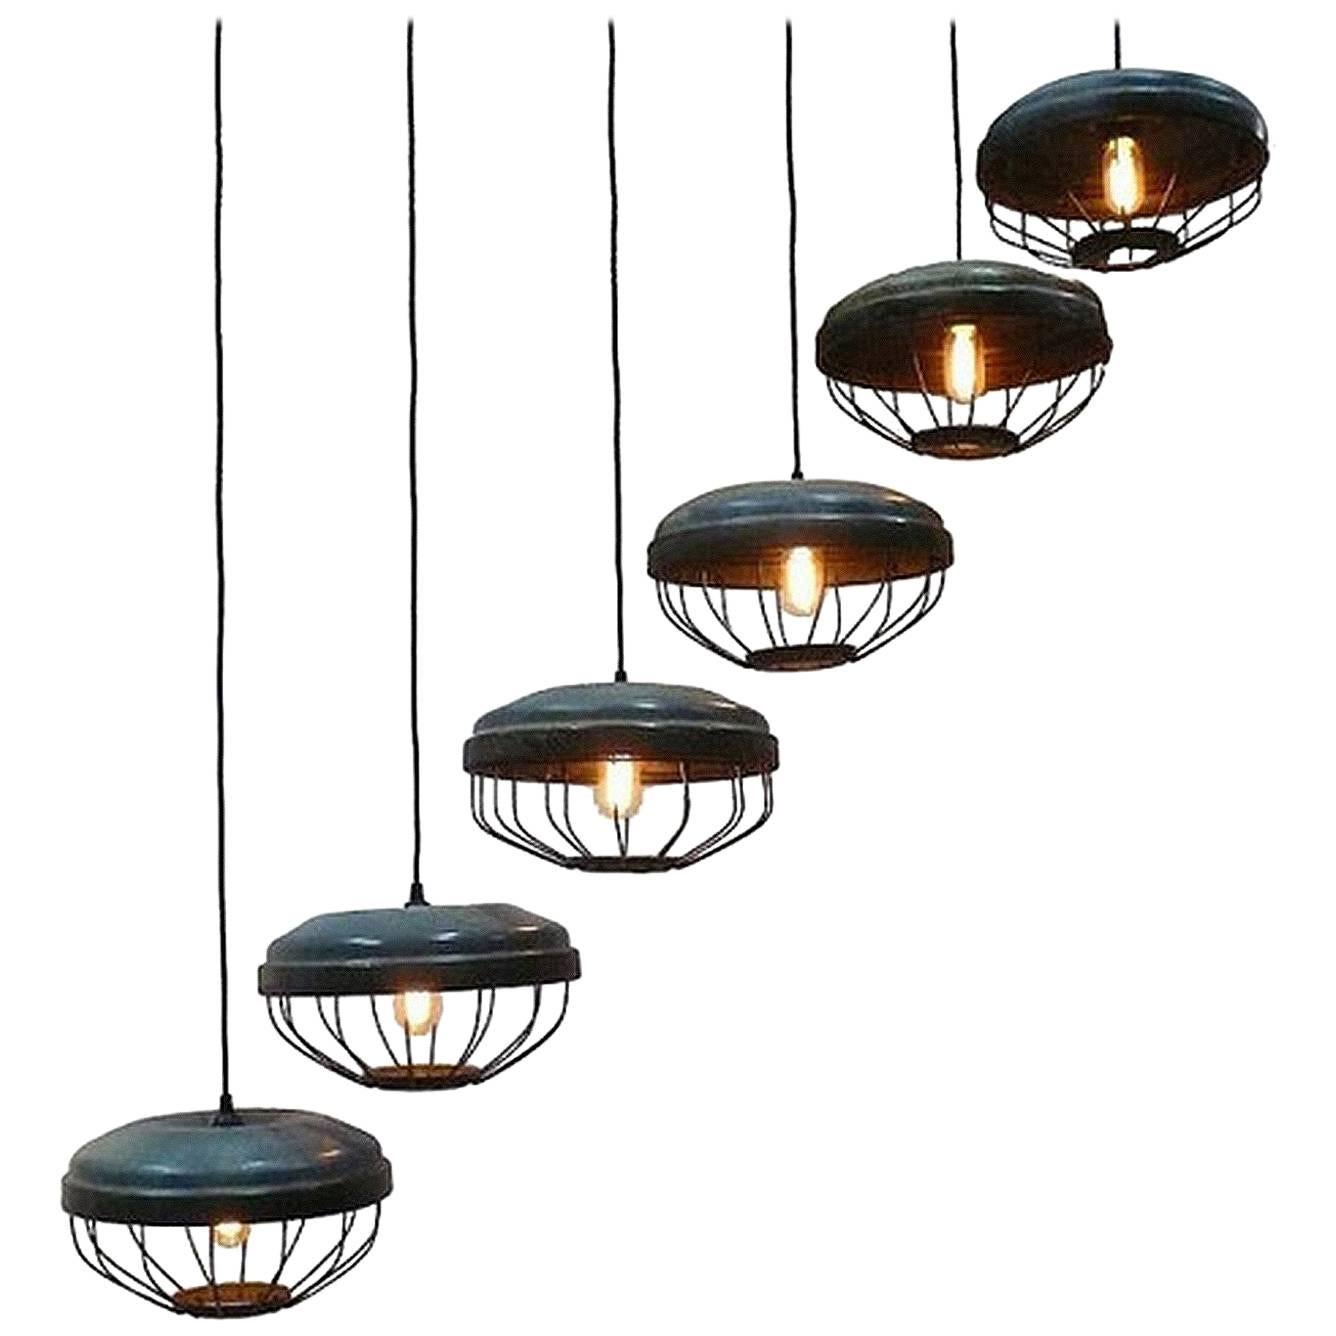 Swinging Metal Enameled Lamps Sold Also Separately